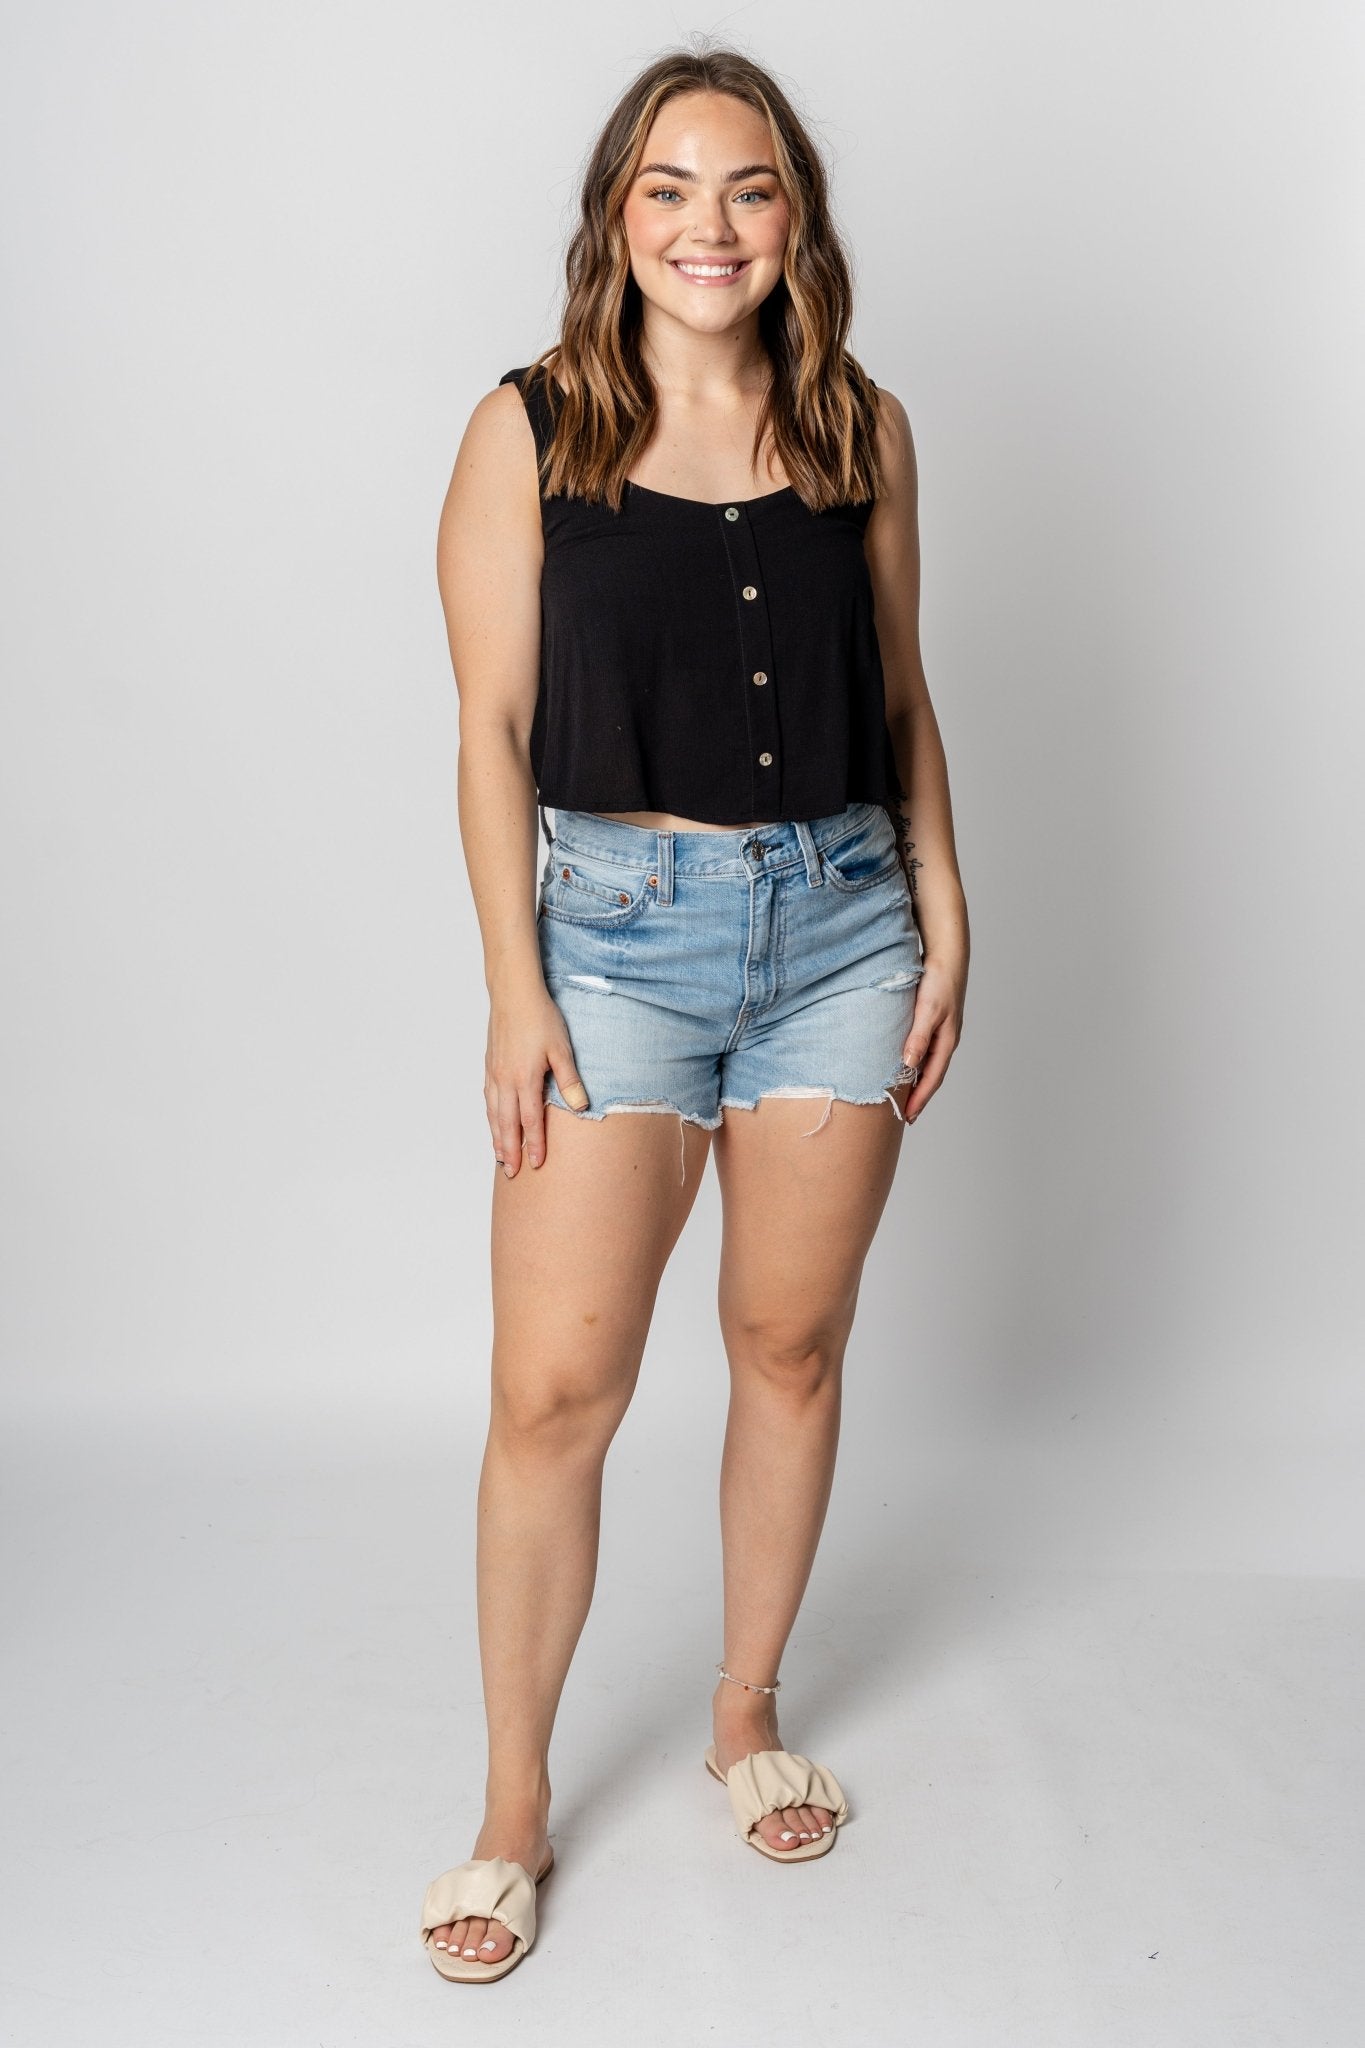 Cropped button tank top black - Trendy Top - Fashion Tank Tops at Lush Fashion Lounge Boutique in Oklahoma City